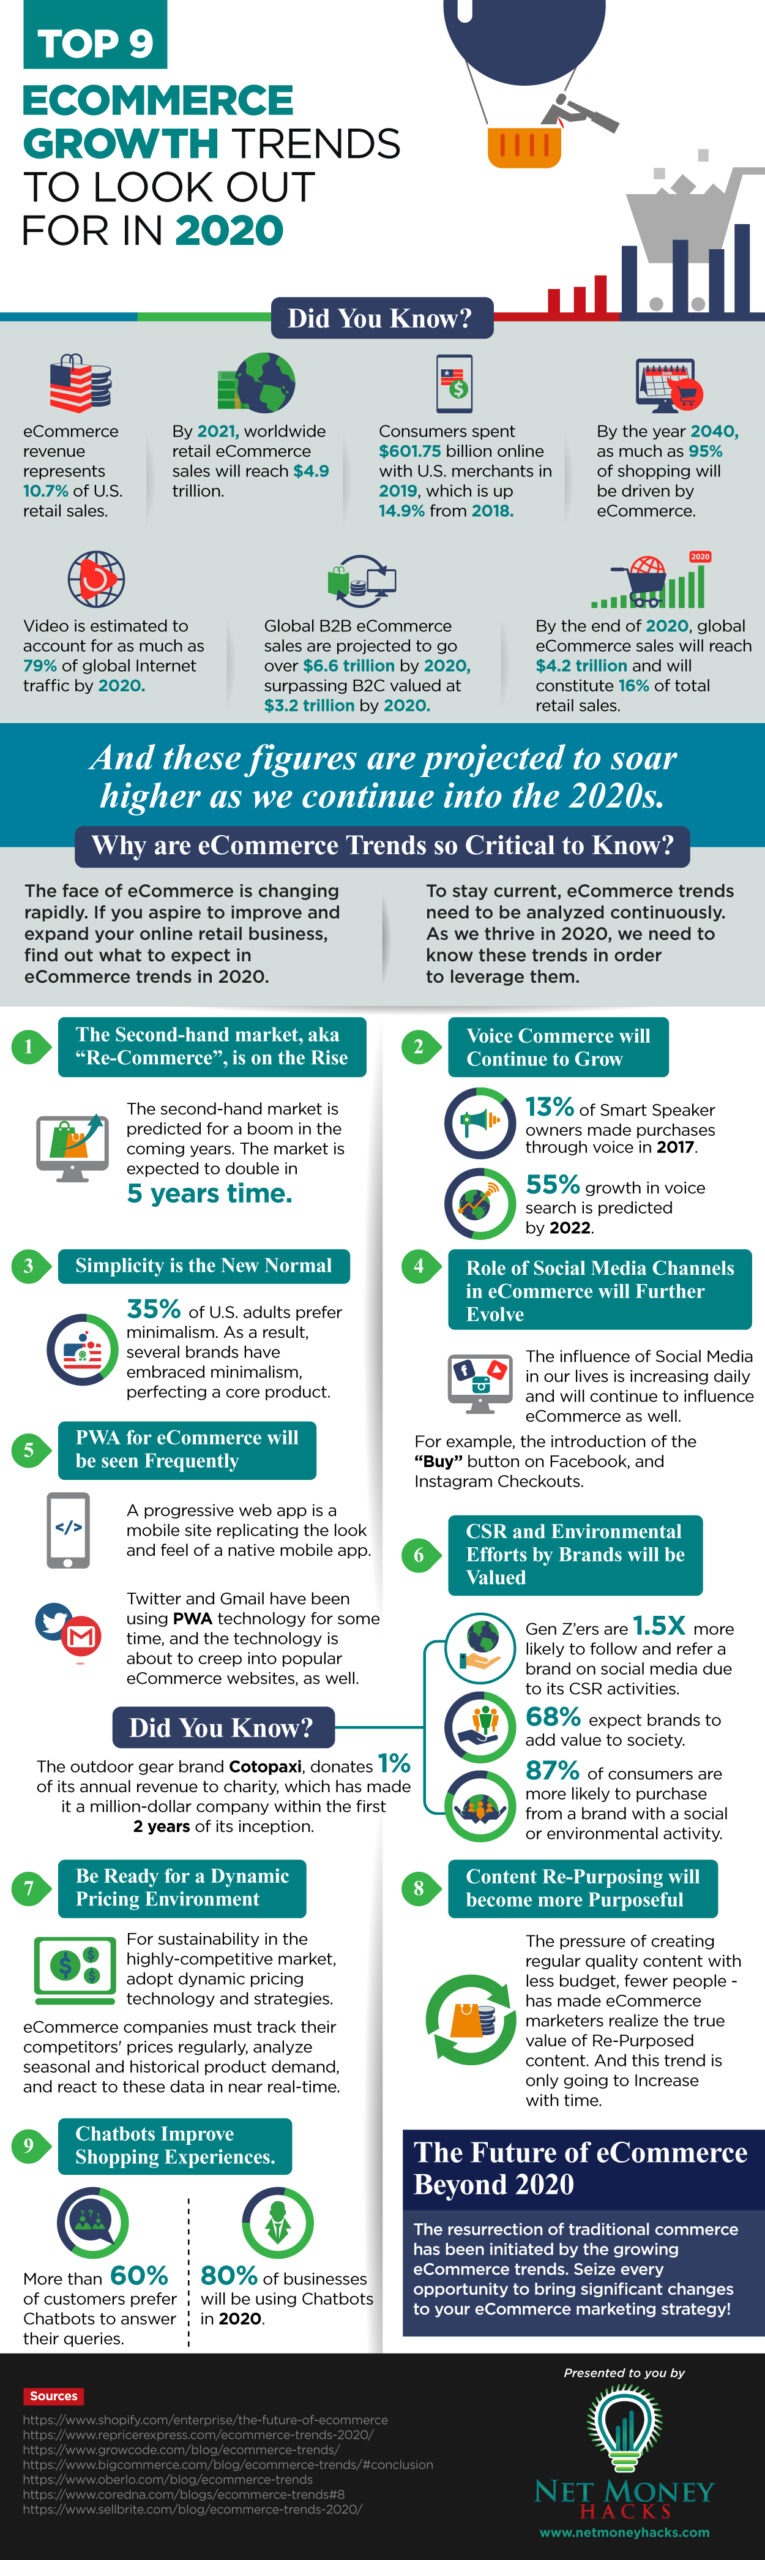 Infographic describing in pictorial form the Top 9 ecommerce trends to look out for in 2020 and beyond